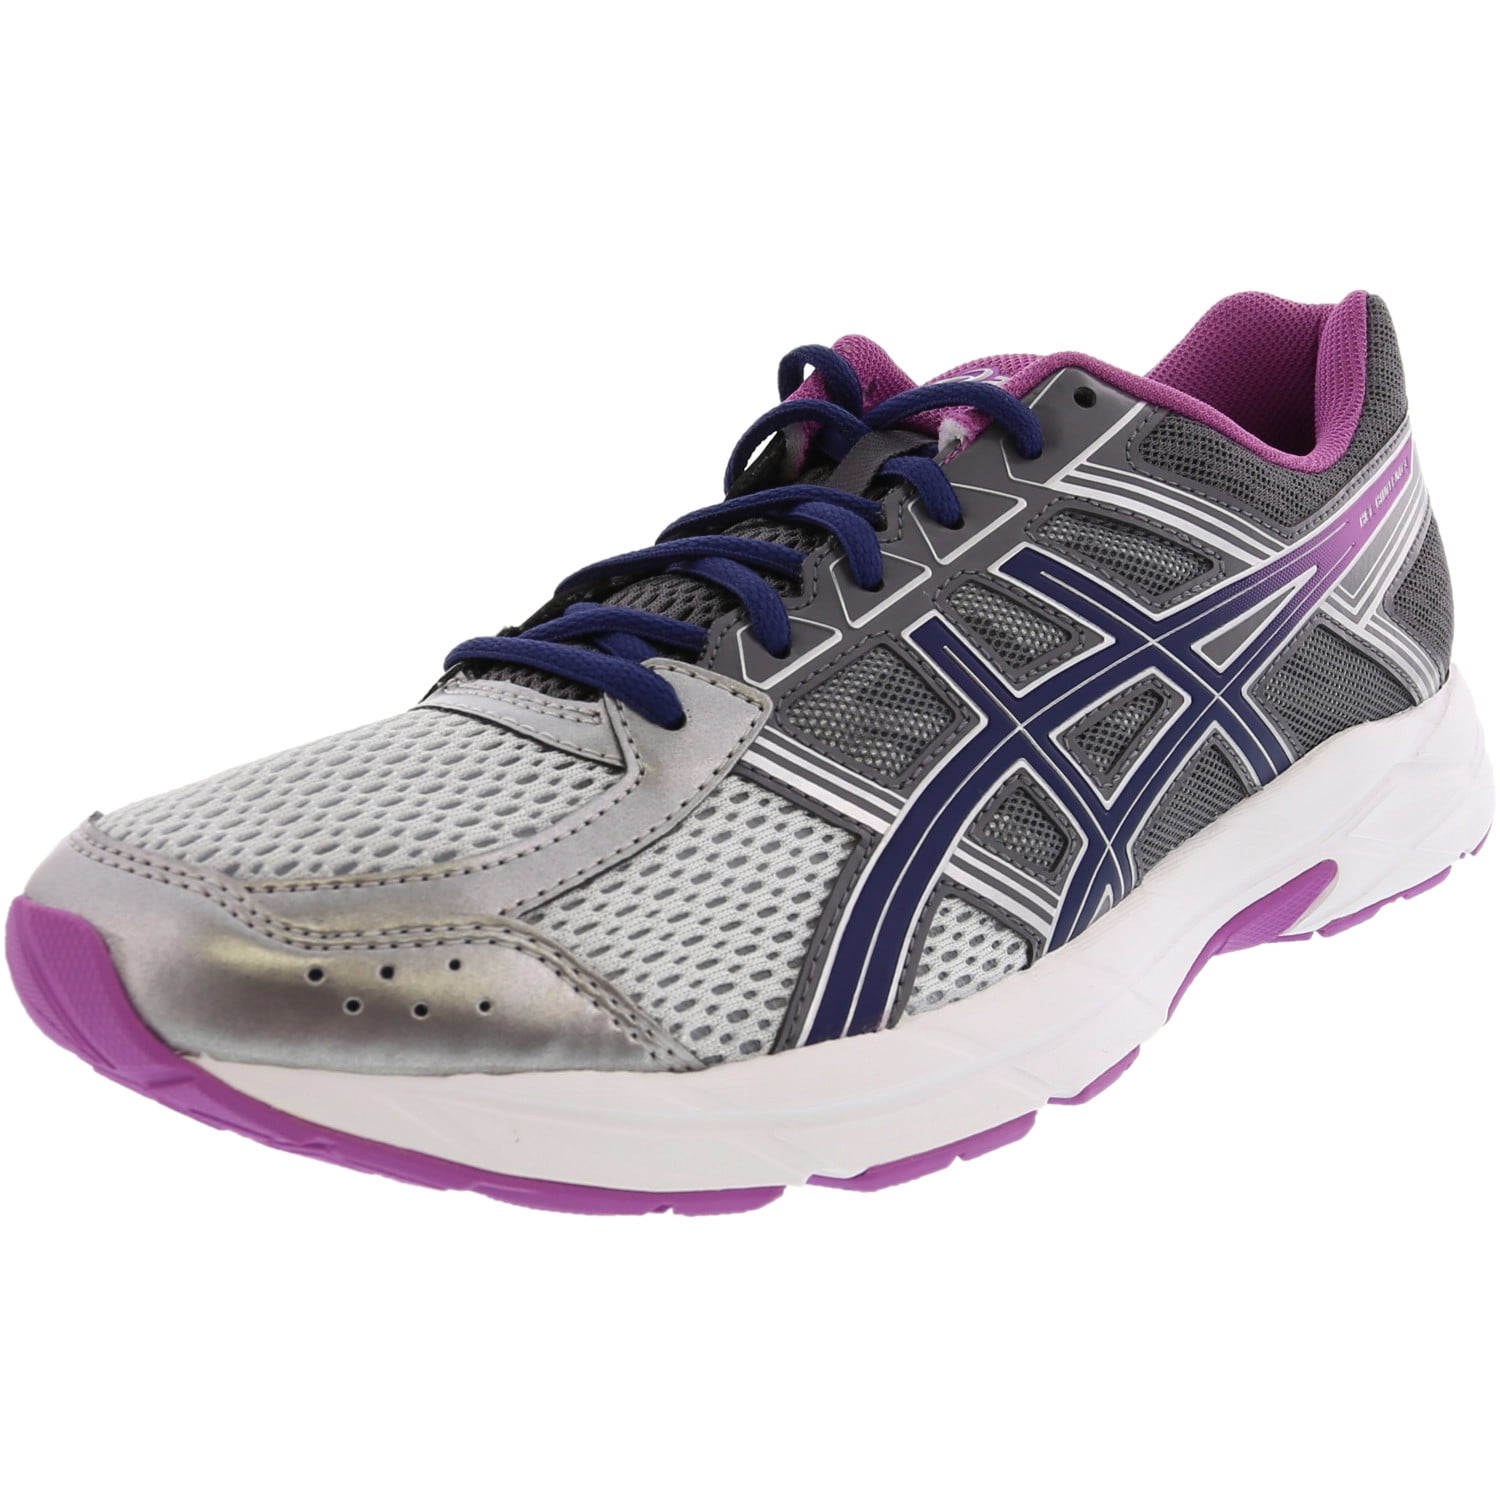 Asics Women's Gel-Contend 4 Silver / Campanula Carbon Ankle-High ...